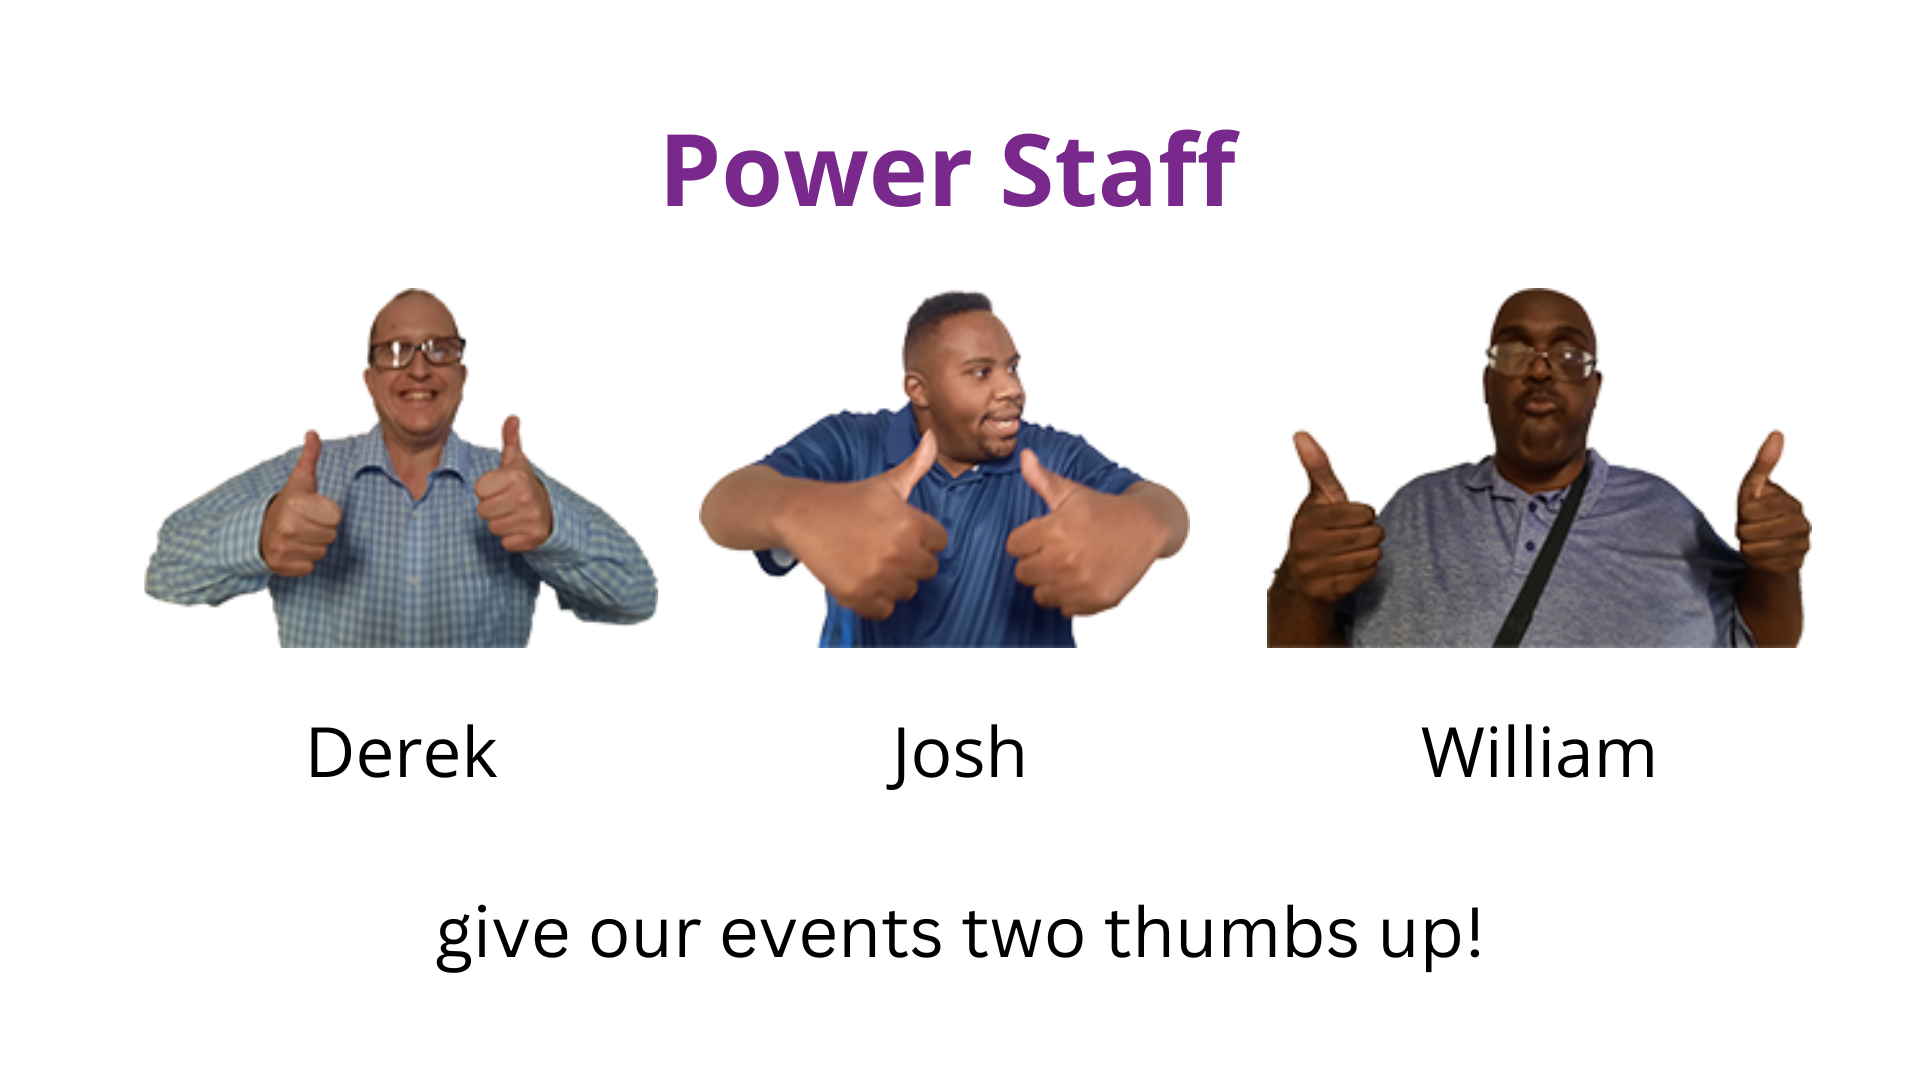 Banner with photos of Power Staff Derek, Josh, and William smiling and giving two thumbs up. Text reads: Power Staff Derek, Josh, and William give our events two thumbs up!